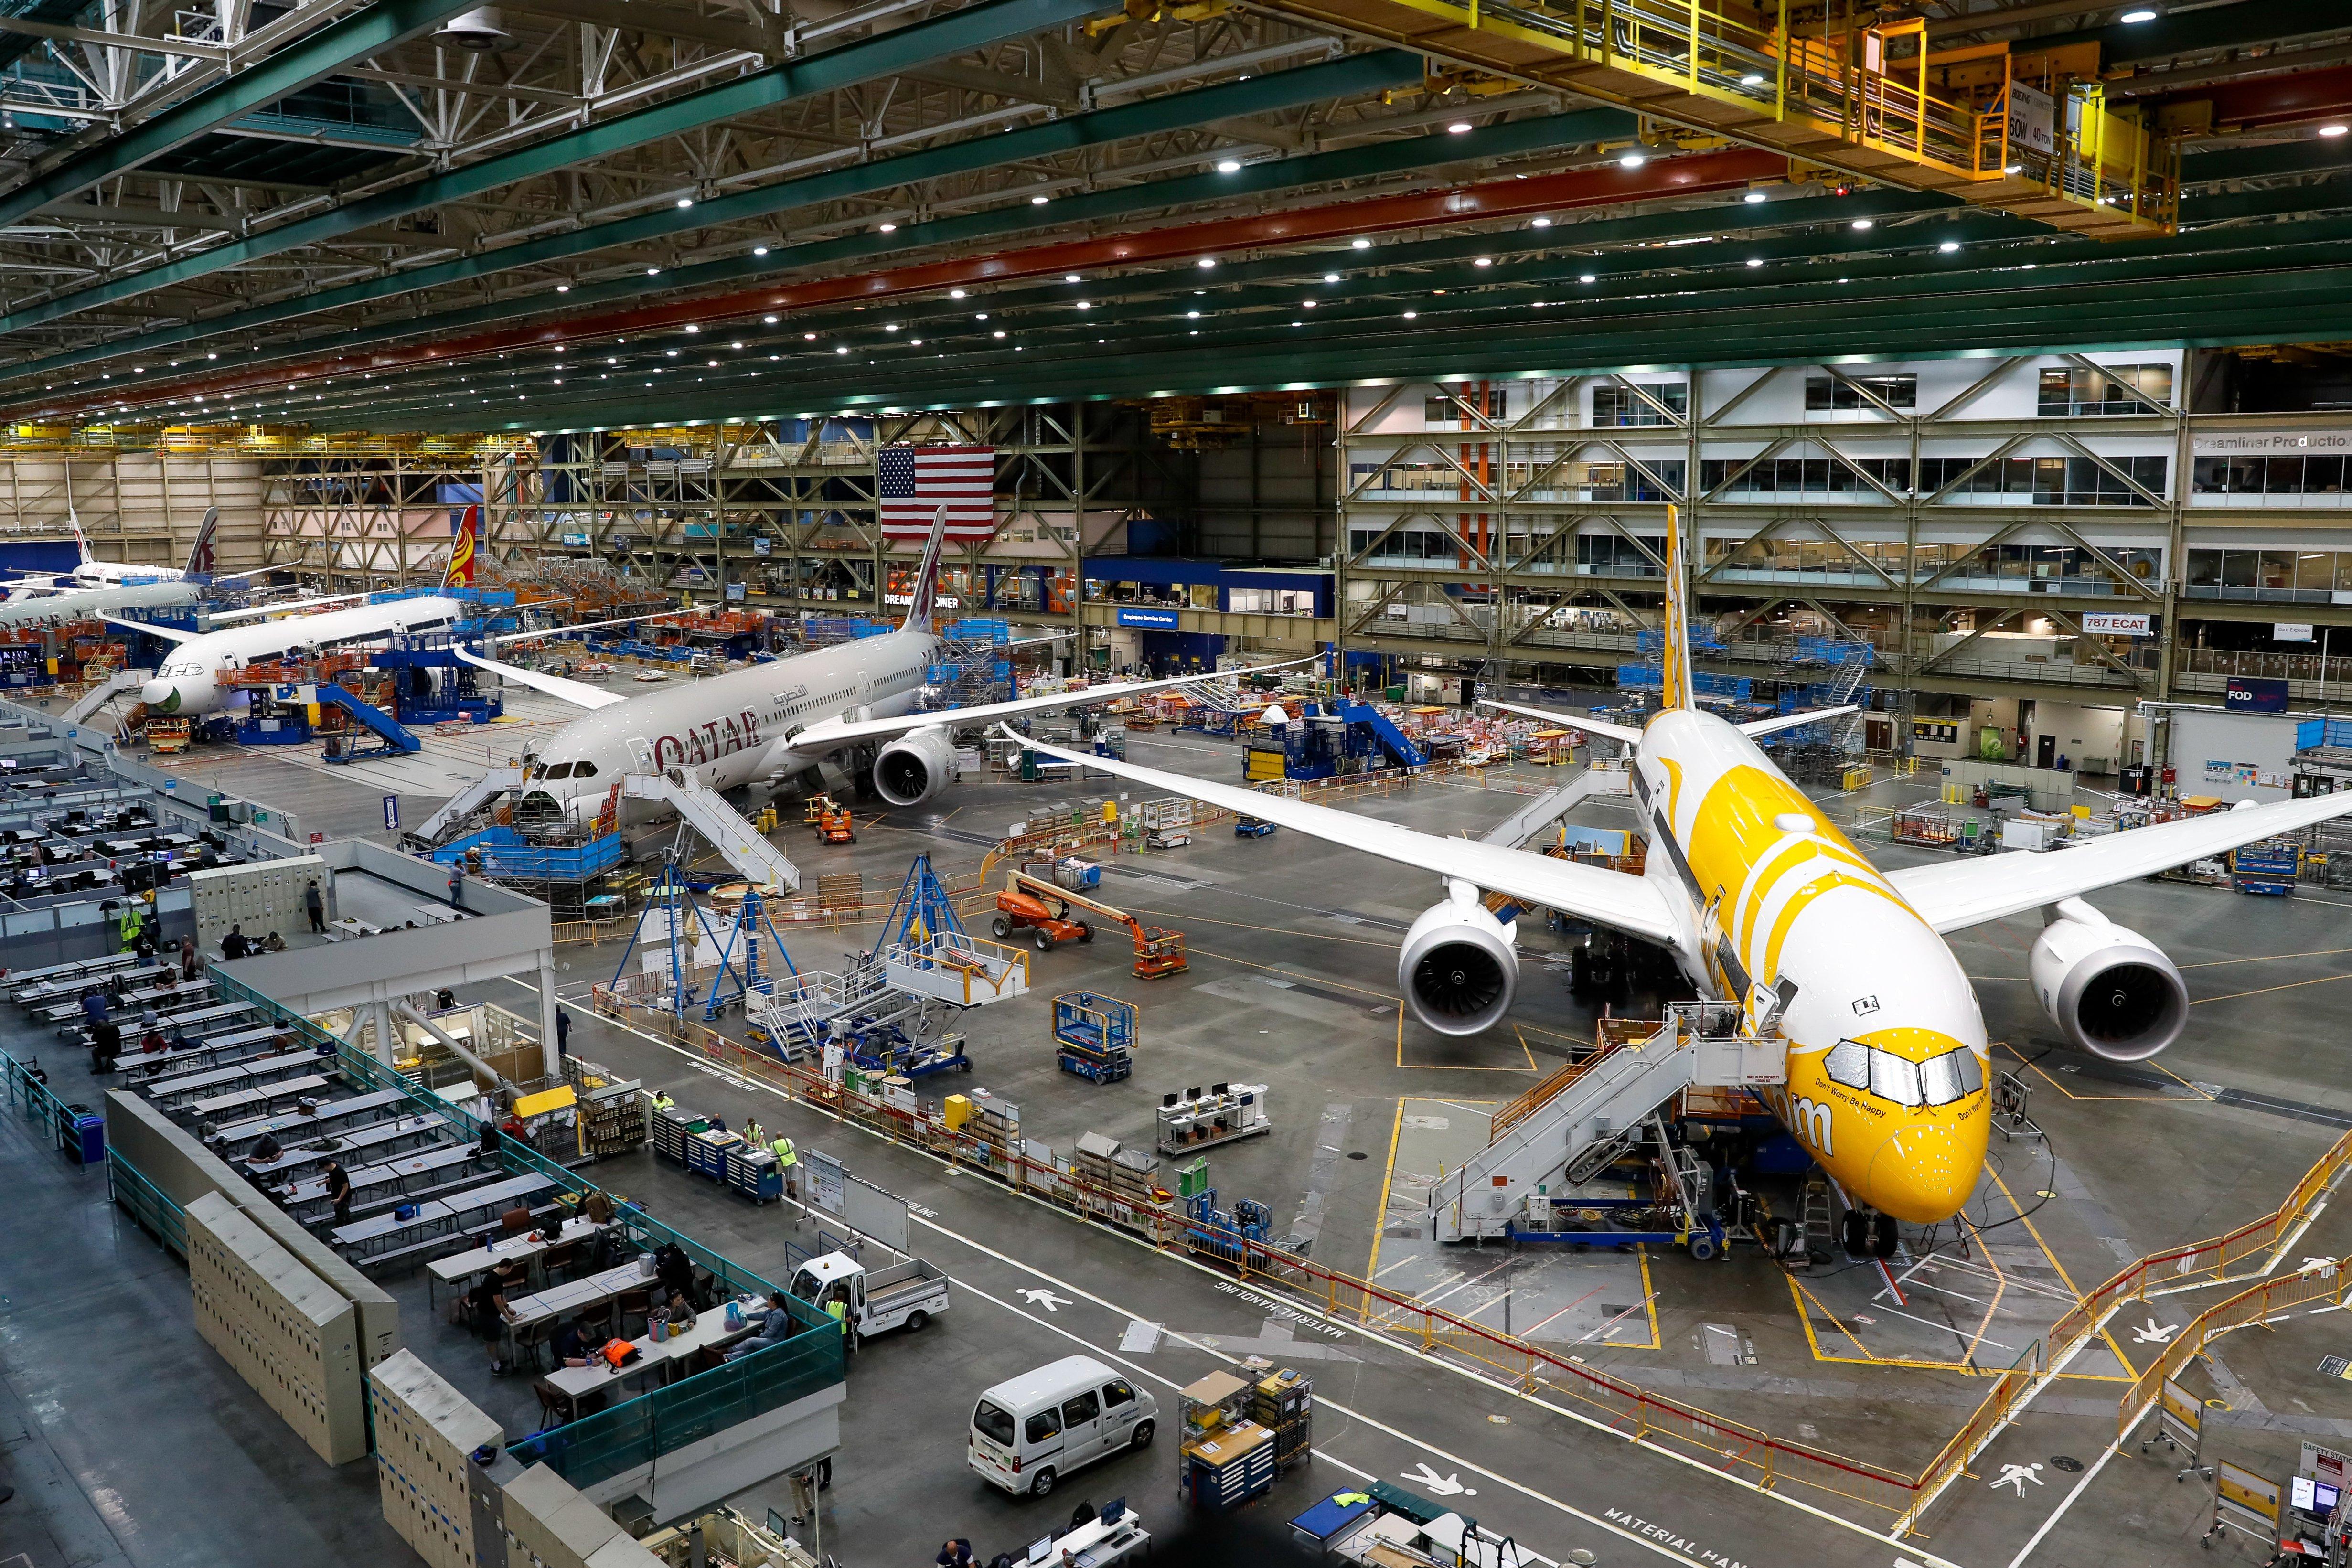 787s in Re-work Stations at Everett, WA